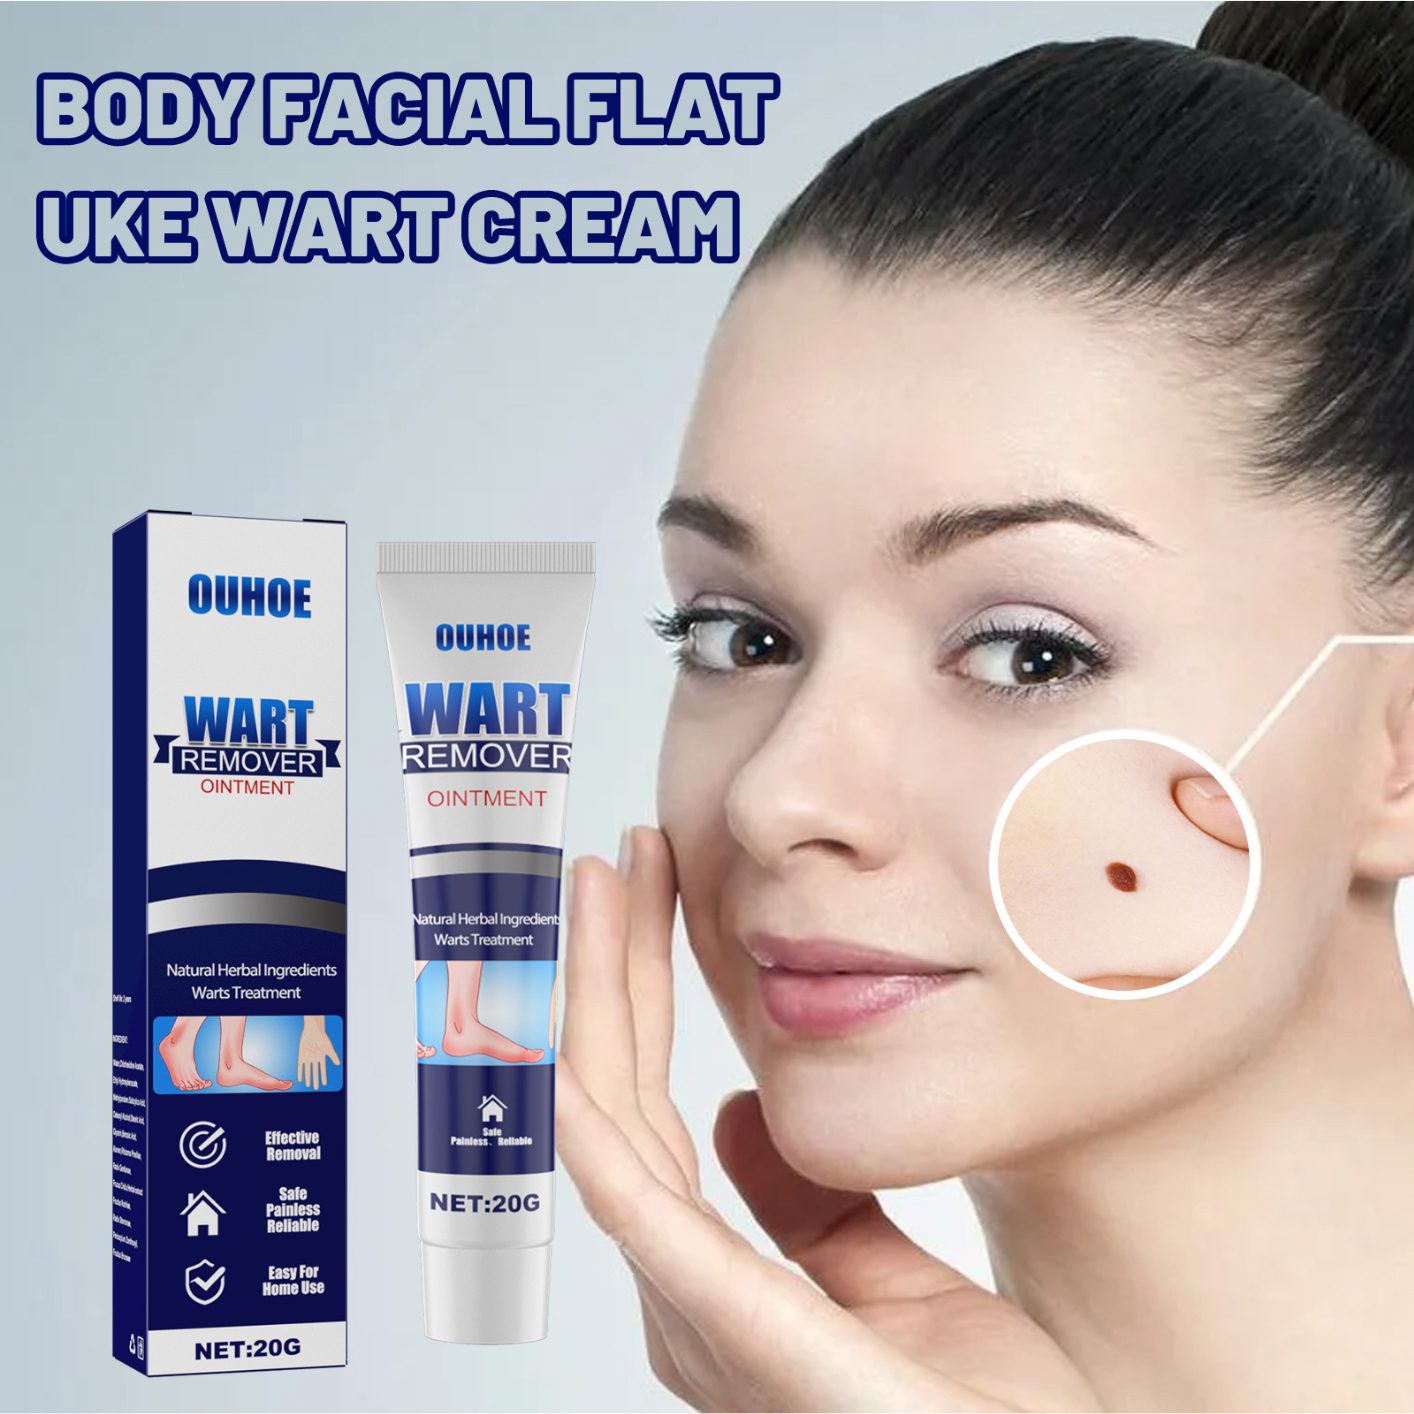 Skin Tag Remover & Wart Remover Cream - Quickly and Easily Remove Common Skin Tag, Wart and Callus - Effective and Scar